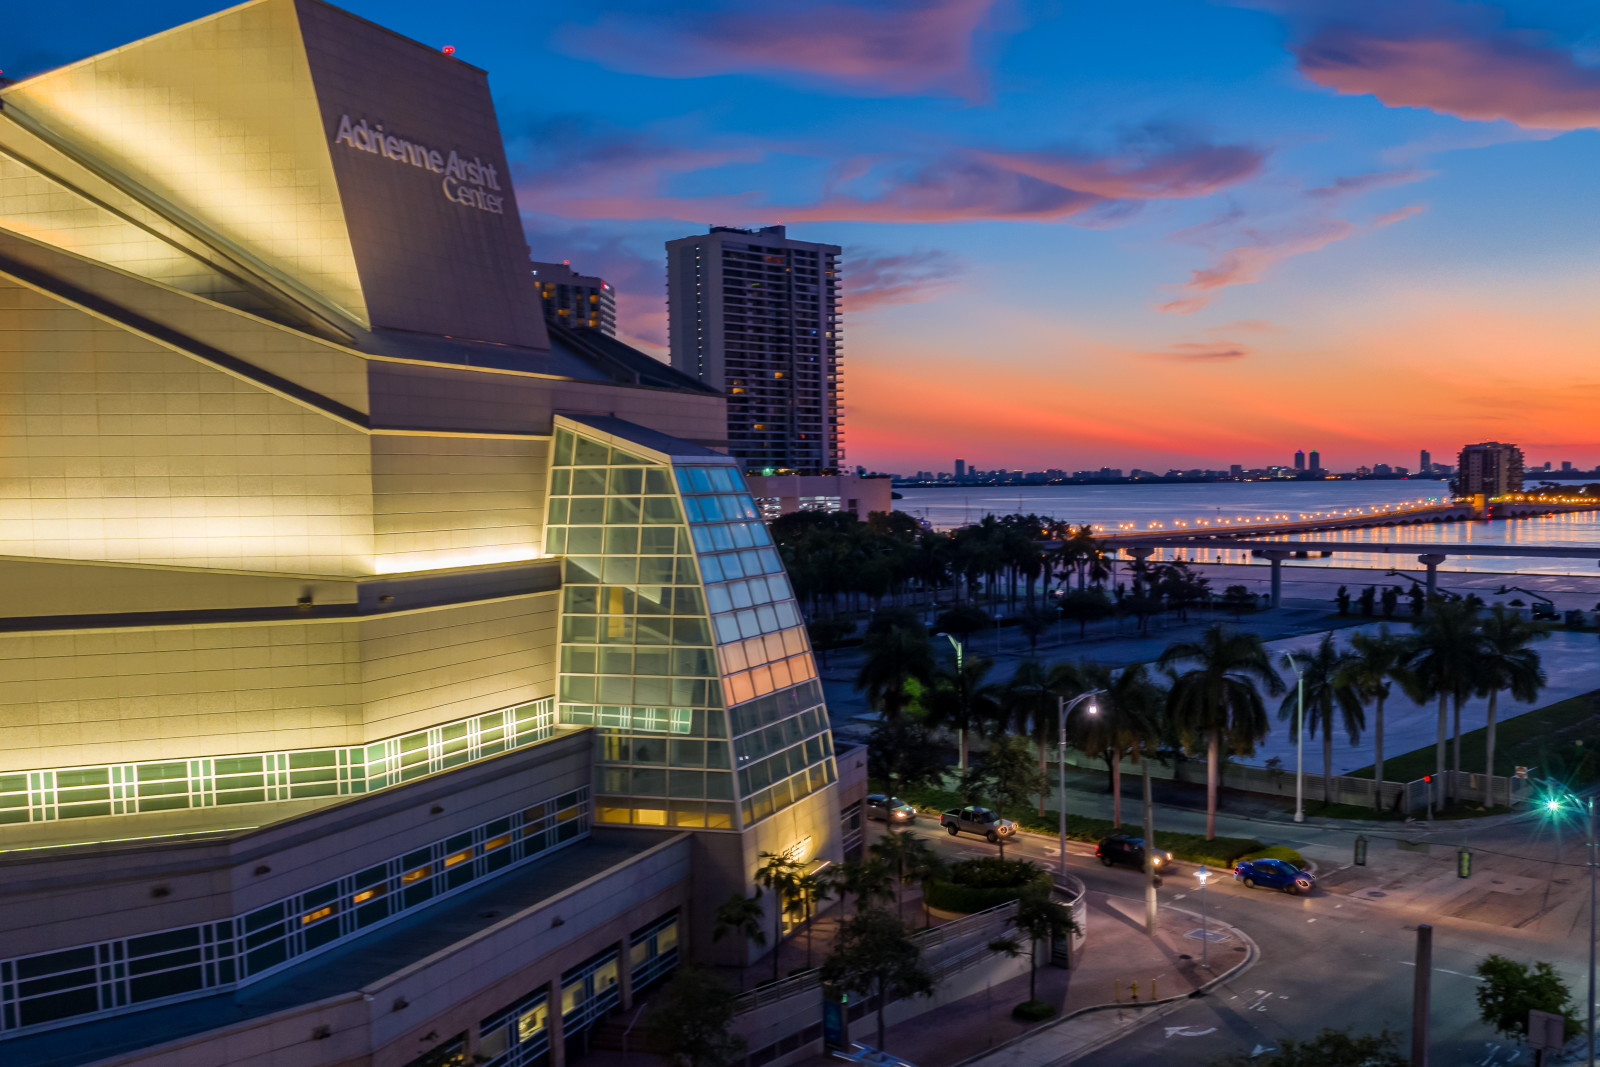 Adrienne Arsht Center for the Performing Arts of MiamiDade County